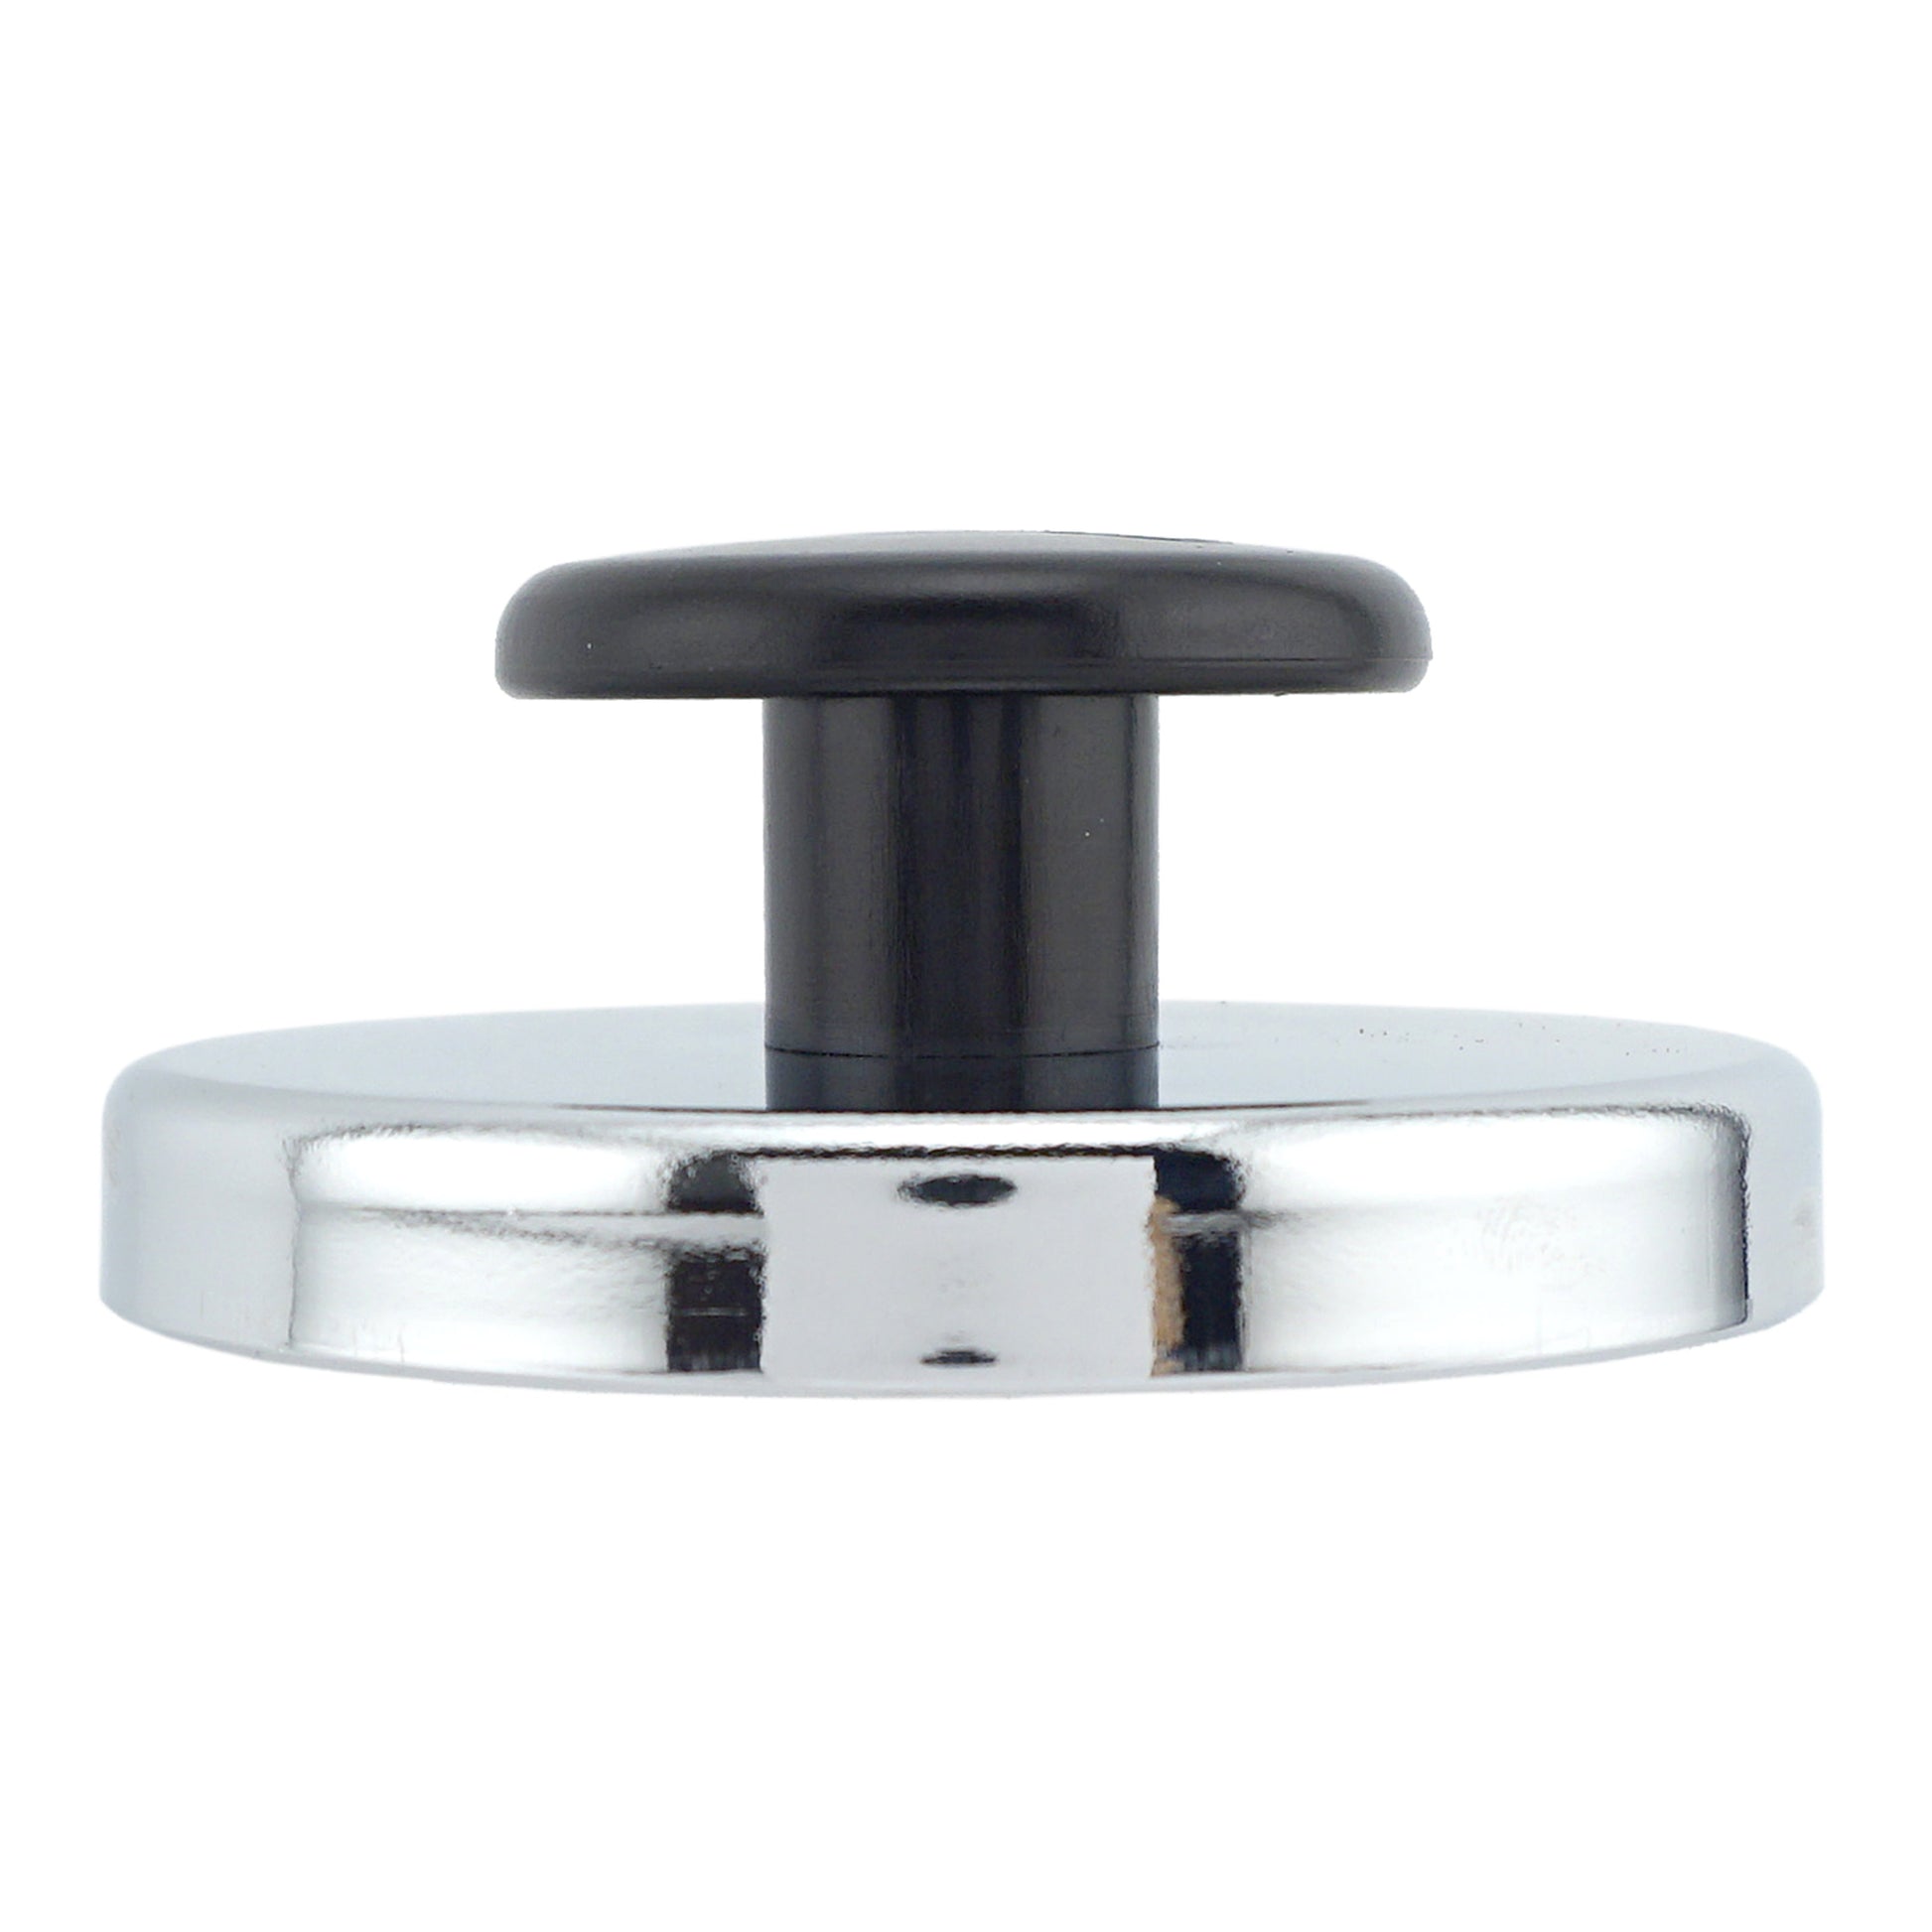 Load image into Gallery viewer, HMKR-80 Ceramic Round Base Magnet with Knob - Bottom View